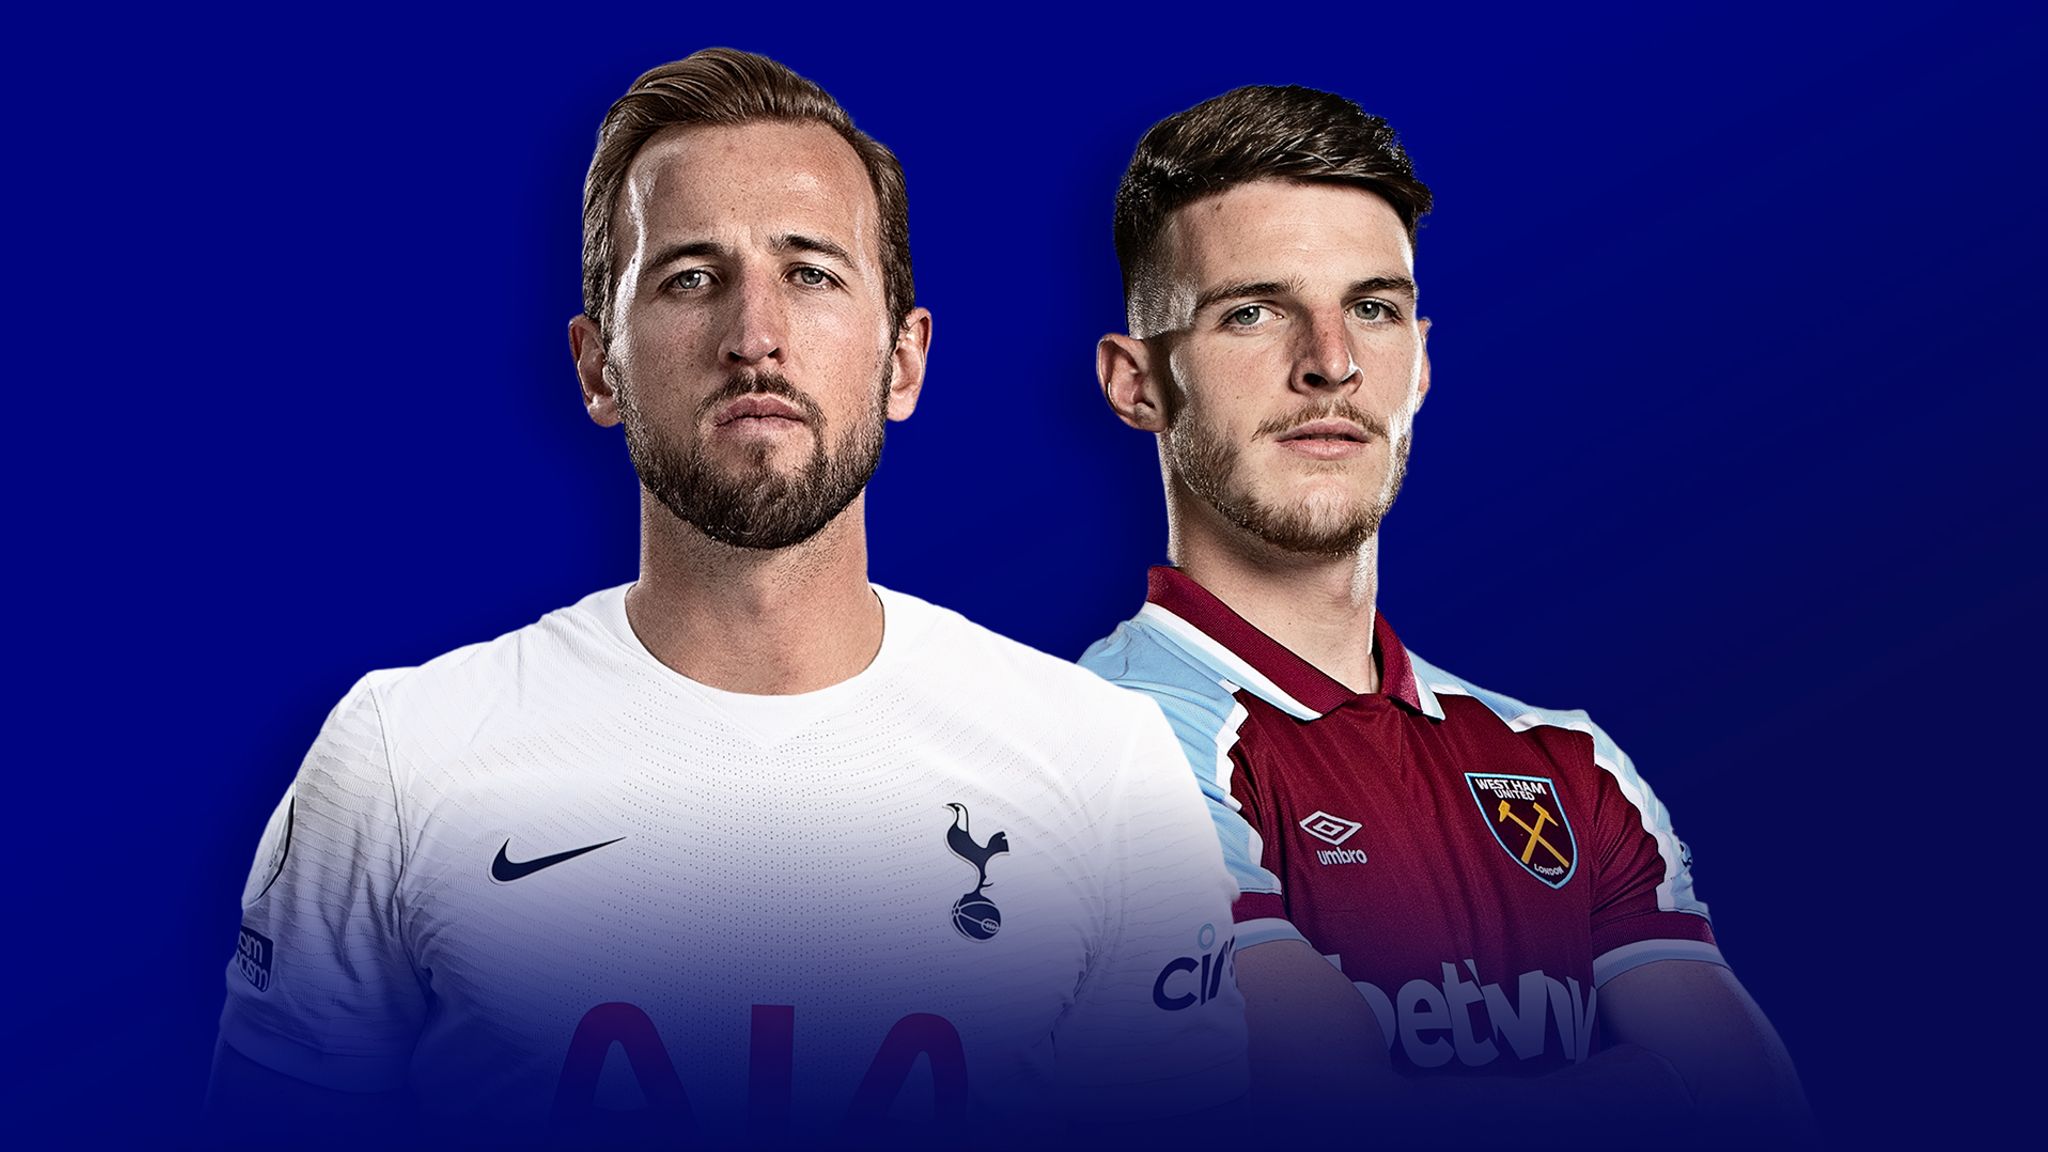 Premier League winners and losers: Arsenal, Spurs, Maguire great; City,  Frank, Klopp questioned